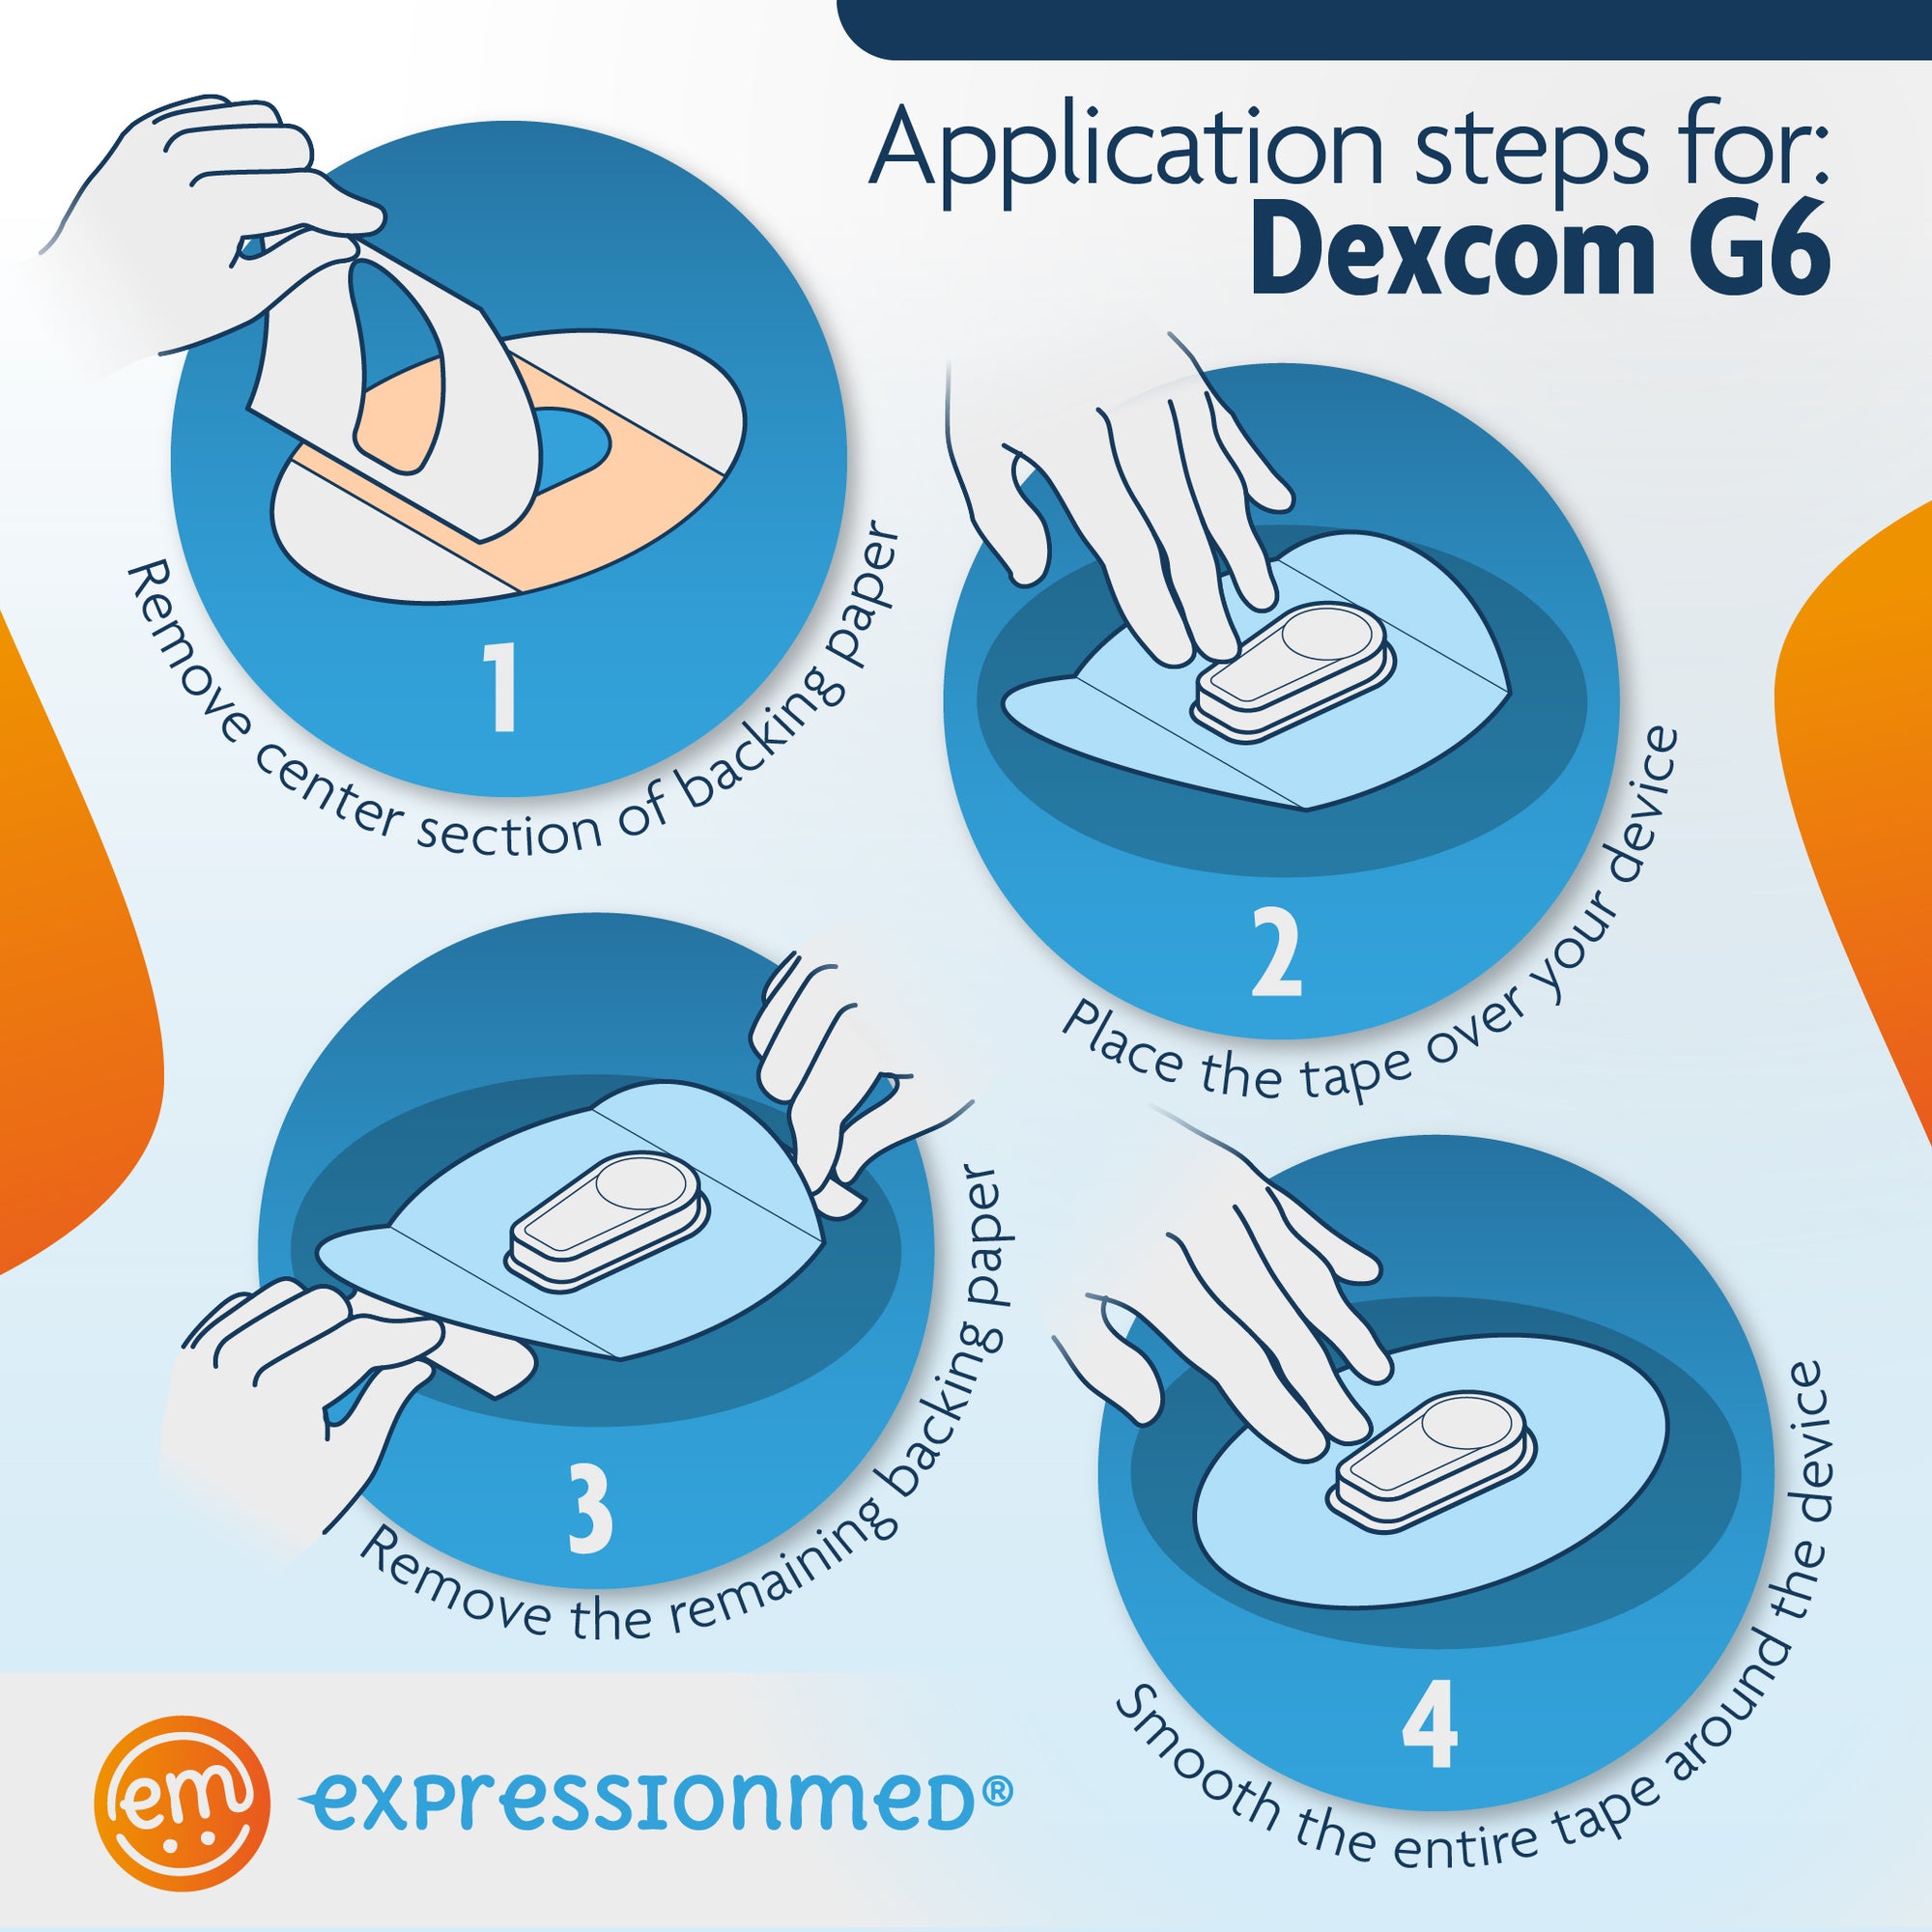 ExpressionMed Dexcom G6 Adhesive patch Application Instructions